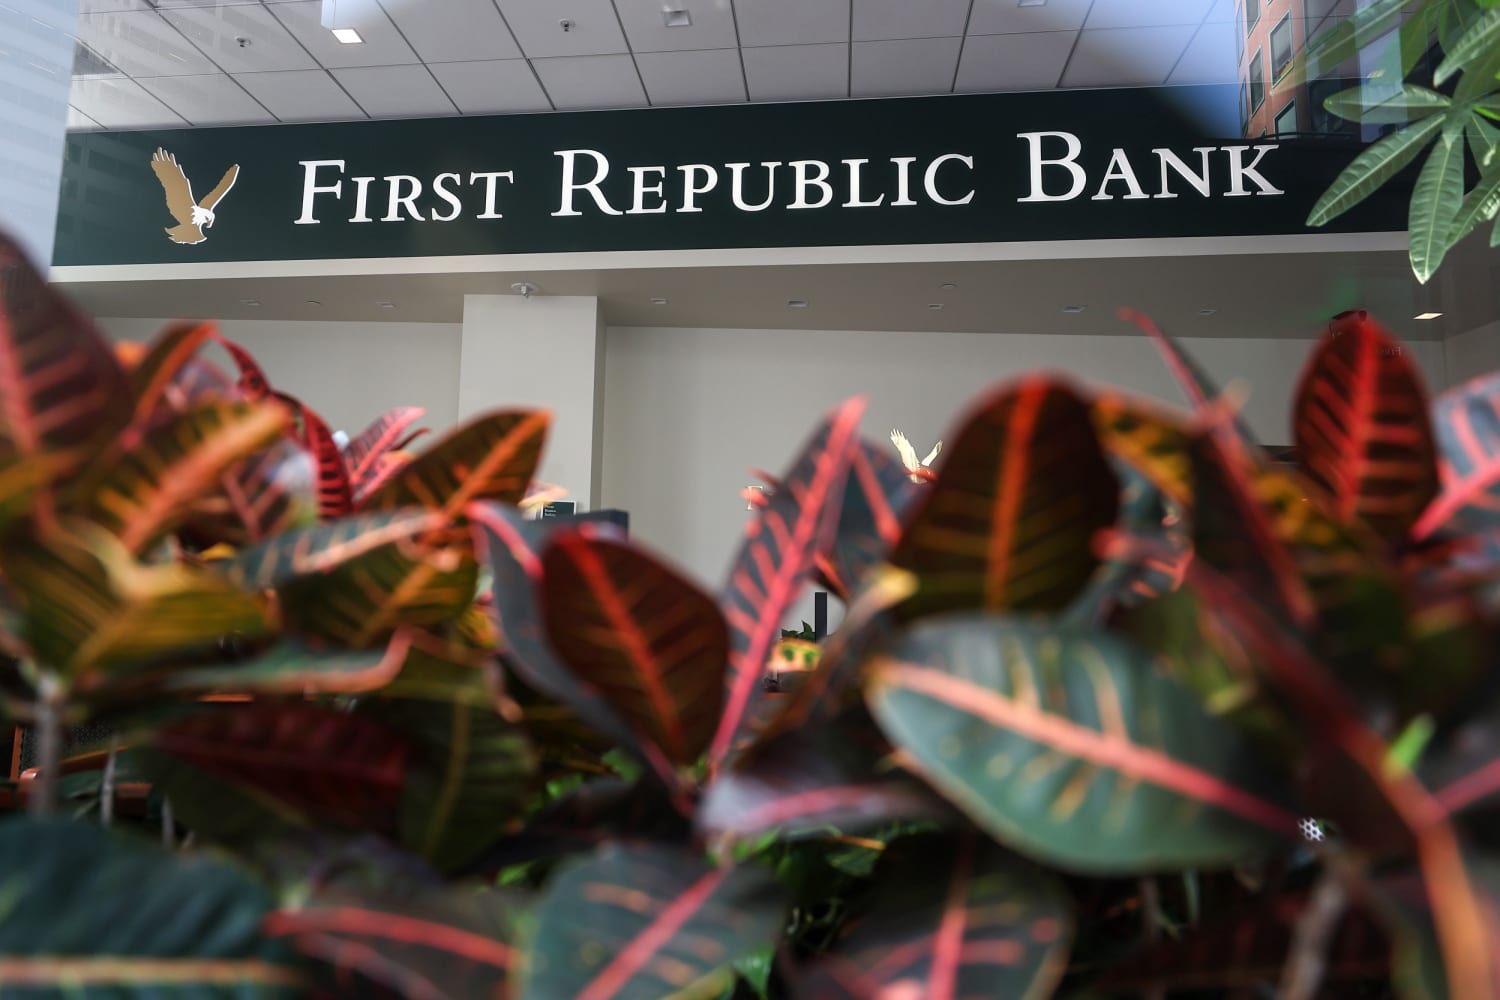 Wall Street rides to the rescue as 11 banks pledge $30 billion to First Republic Bank